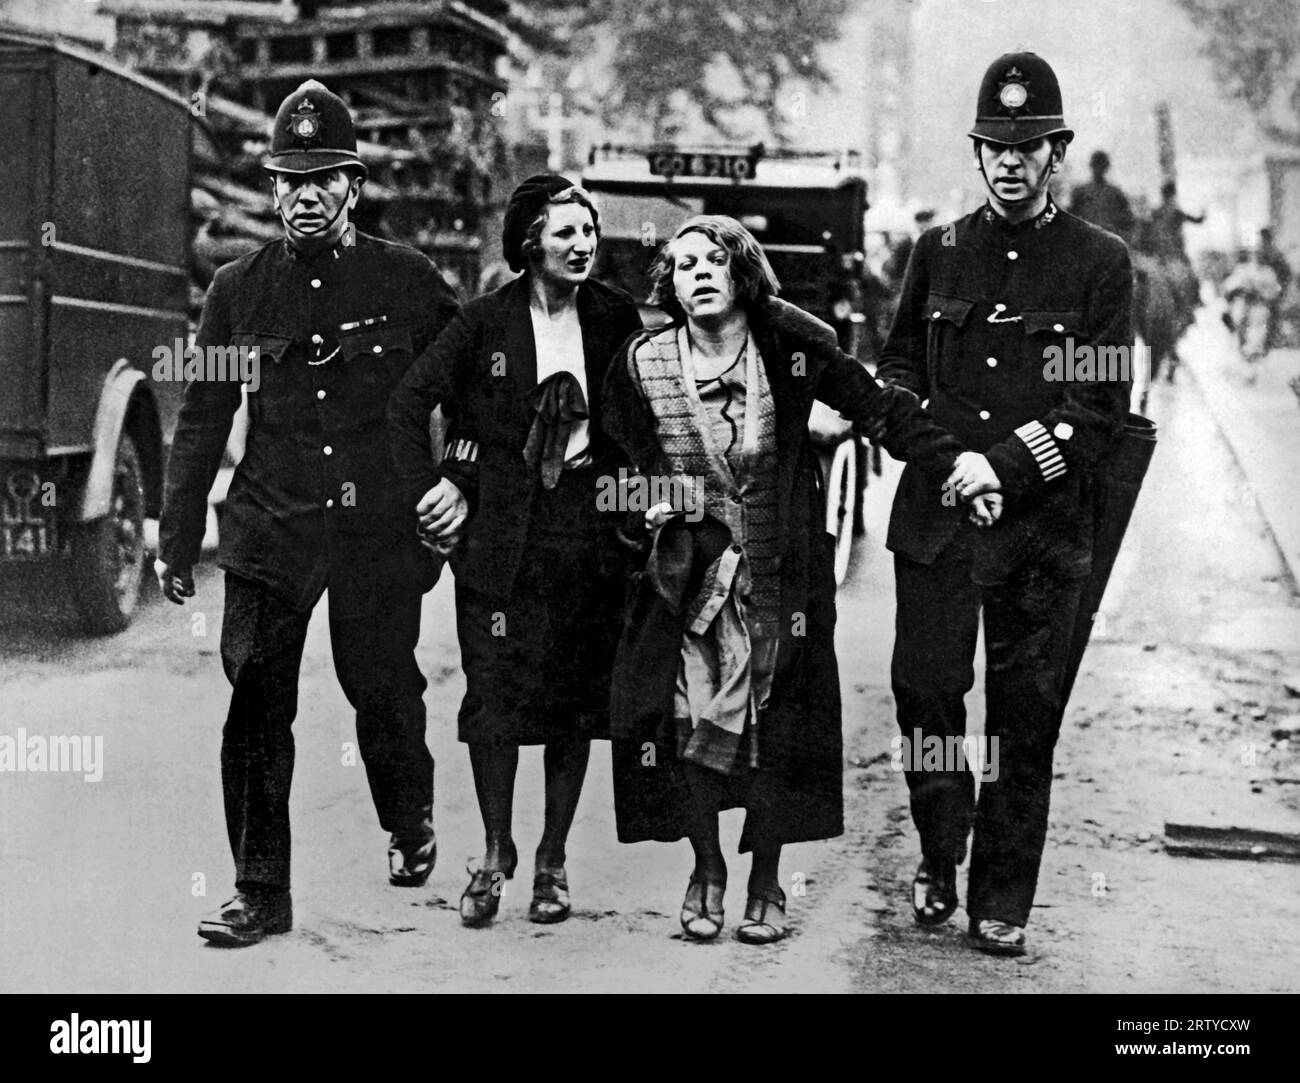 London, England  c. 1931 Mounted police and sympathizers of the unemployed clashed during a demonstration outside of Parliament today. These two girls were arrested by the police at the height of the demonstration. Stock Photo